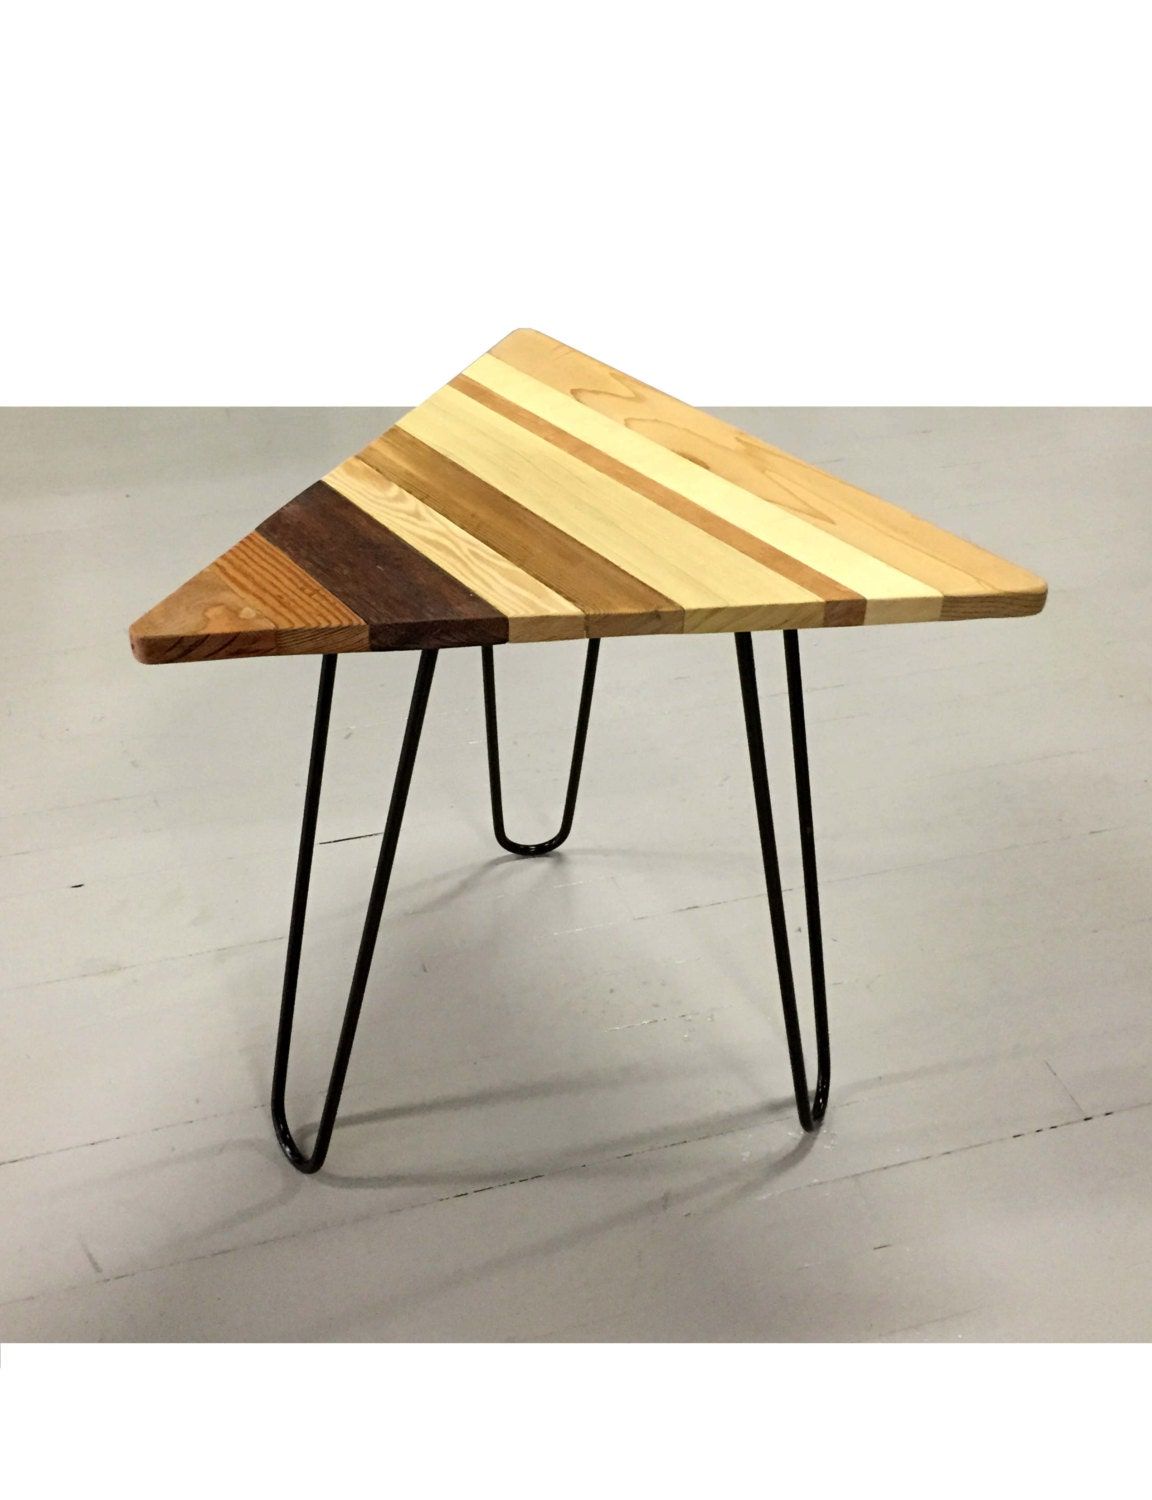 Preferred Triangular Coffee Tables For Reclaimed Wood Triangular Modern End Table Or Coffee Table (View 12 of 20)